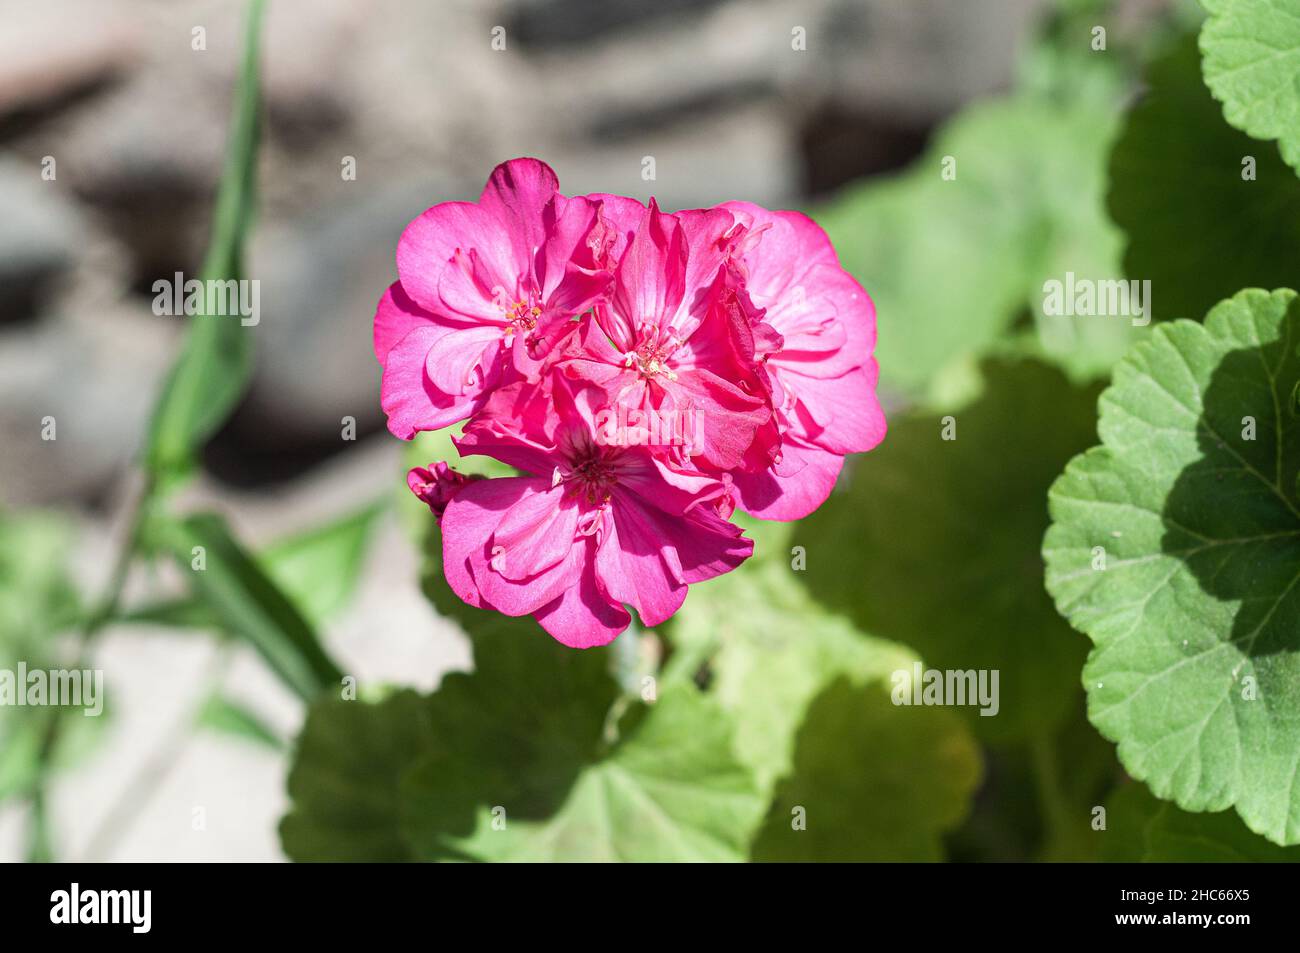 Pink flowers of pelargonium in the blurred natural background Stock Photo